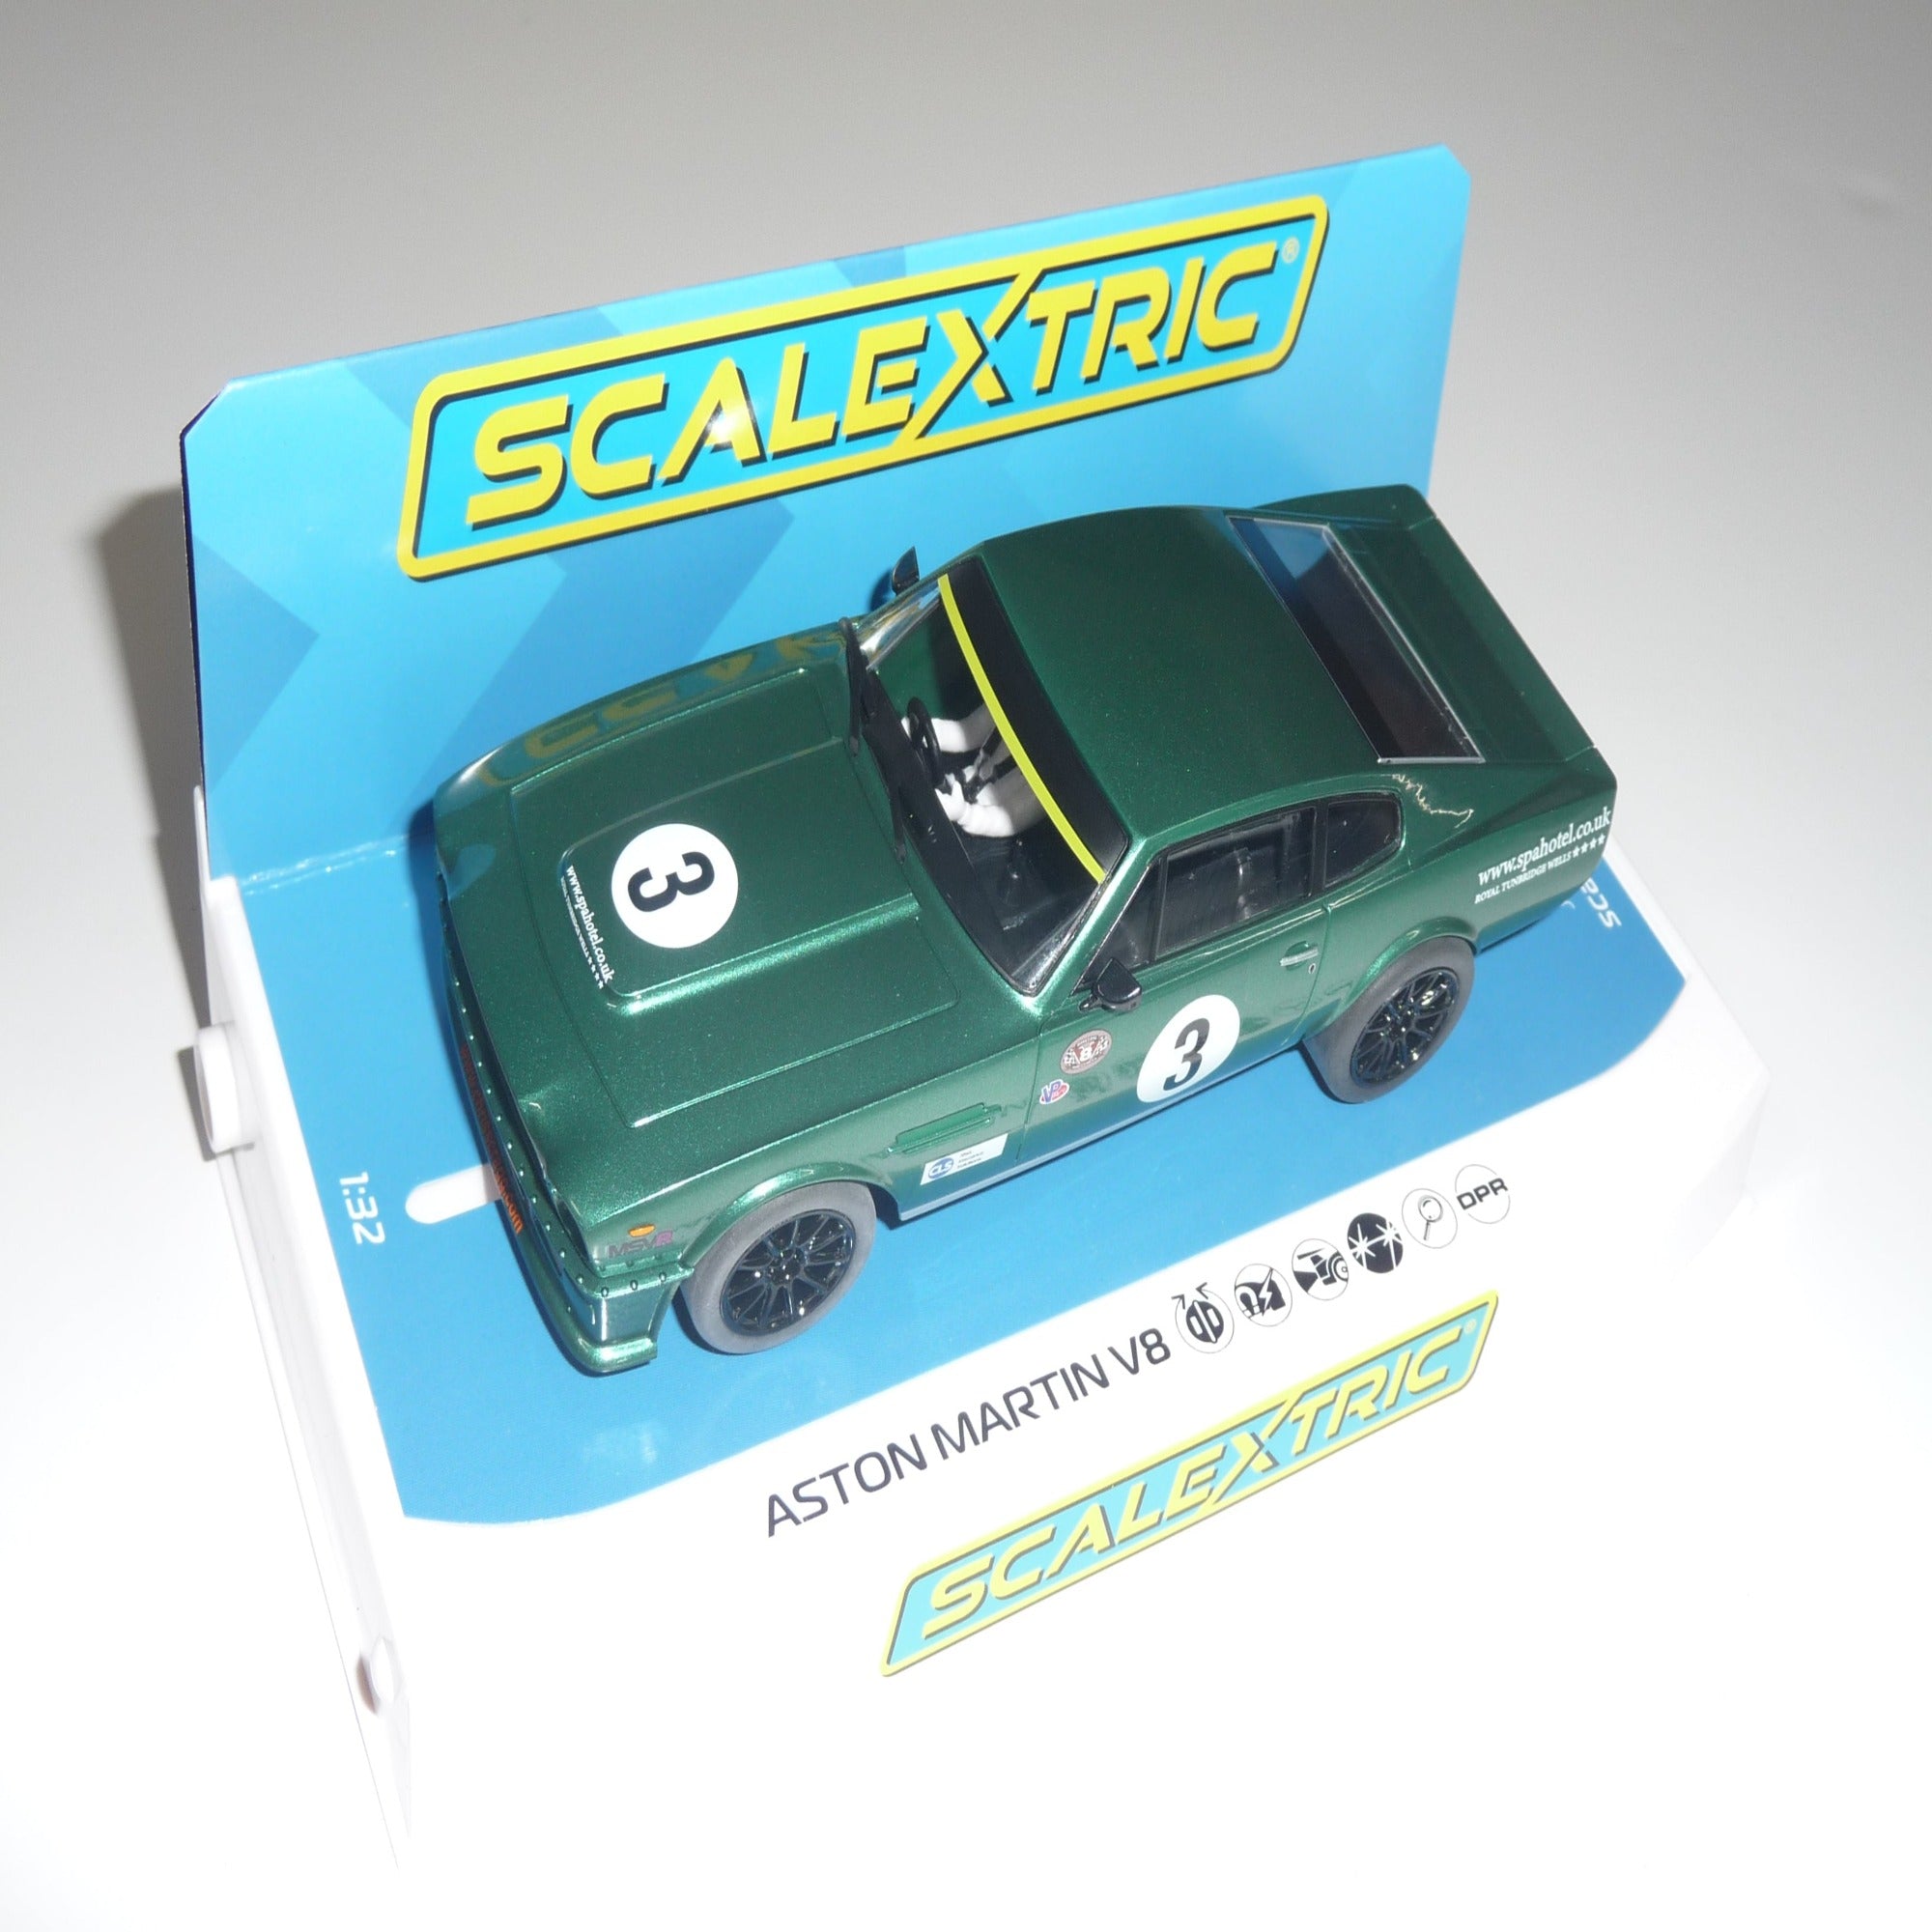 Scalextric Aston Martin V8 C4256  Free Postage on Orders over $40